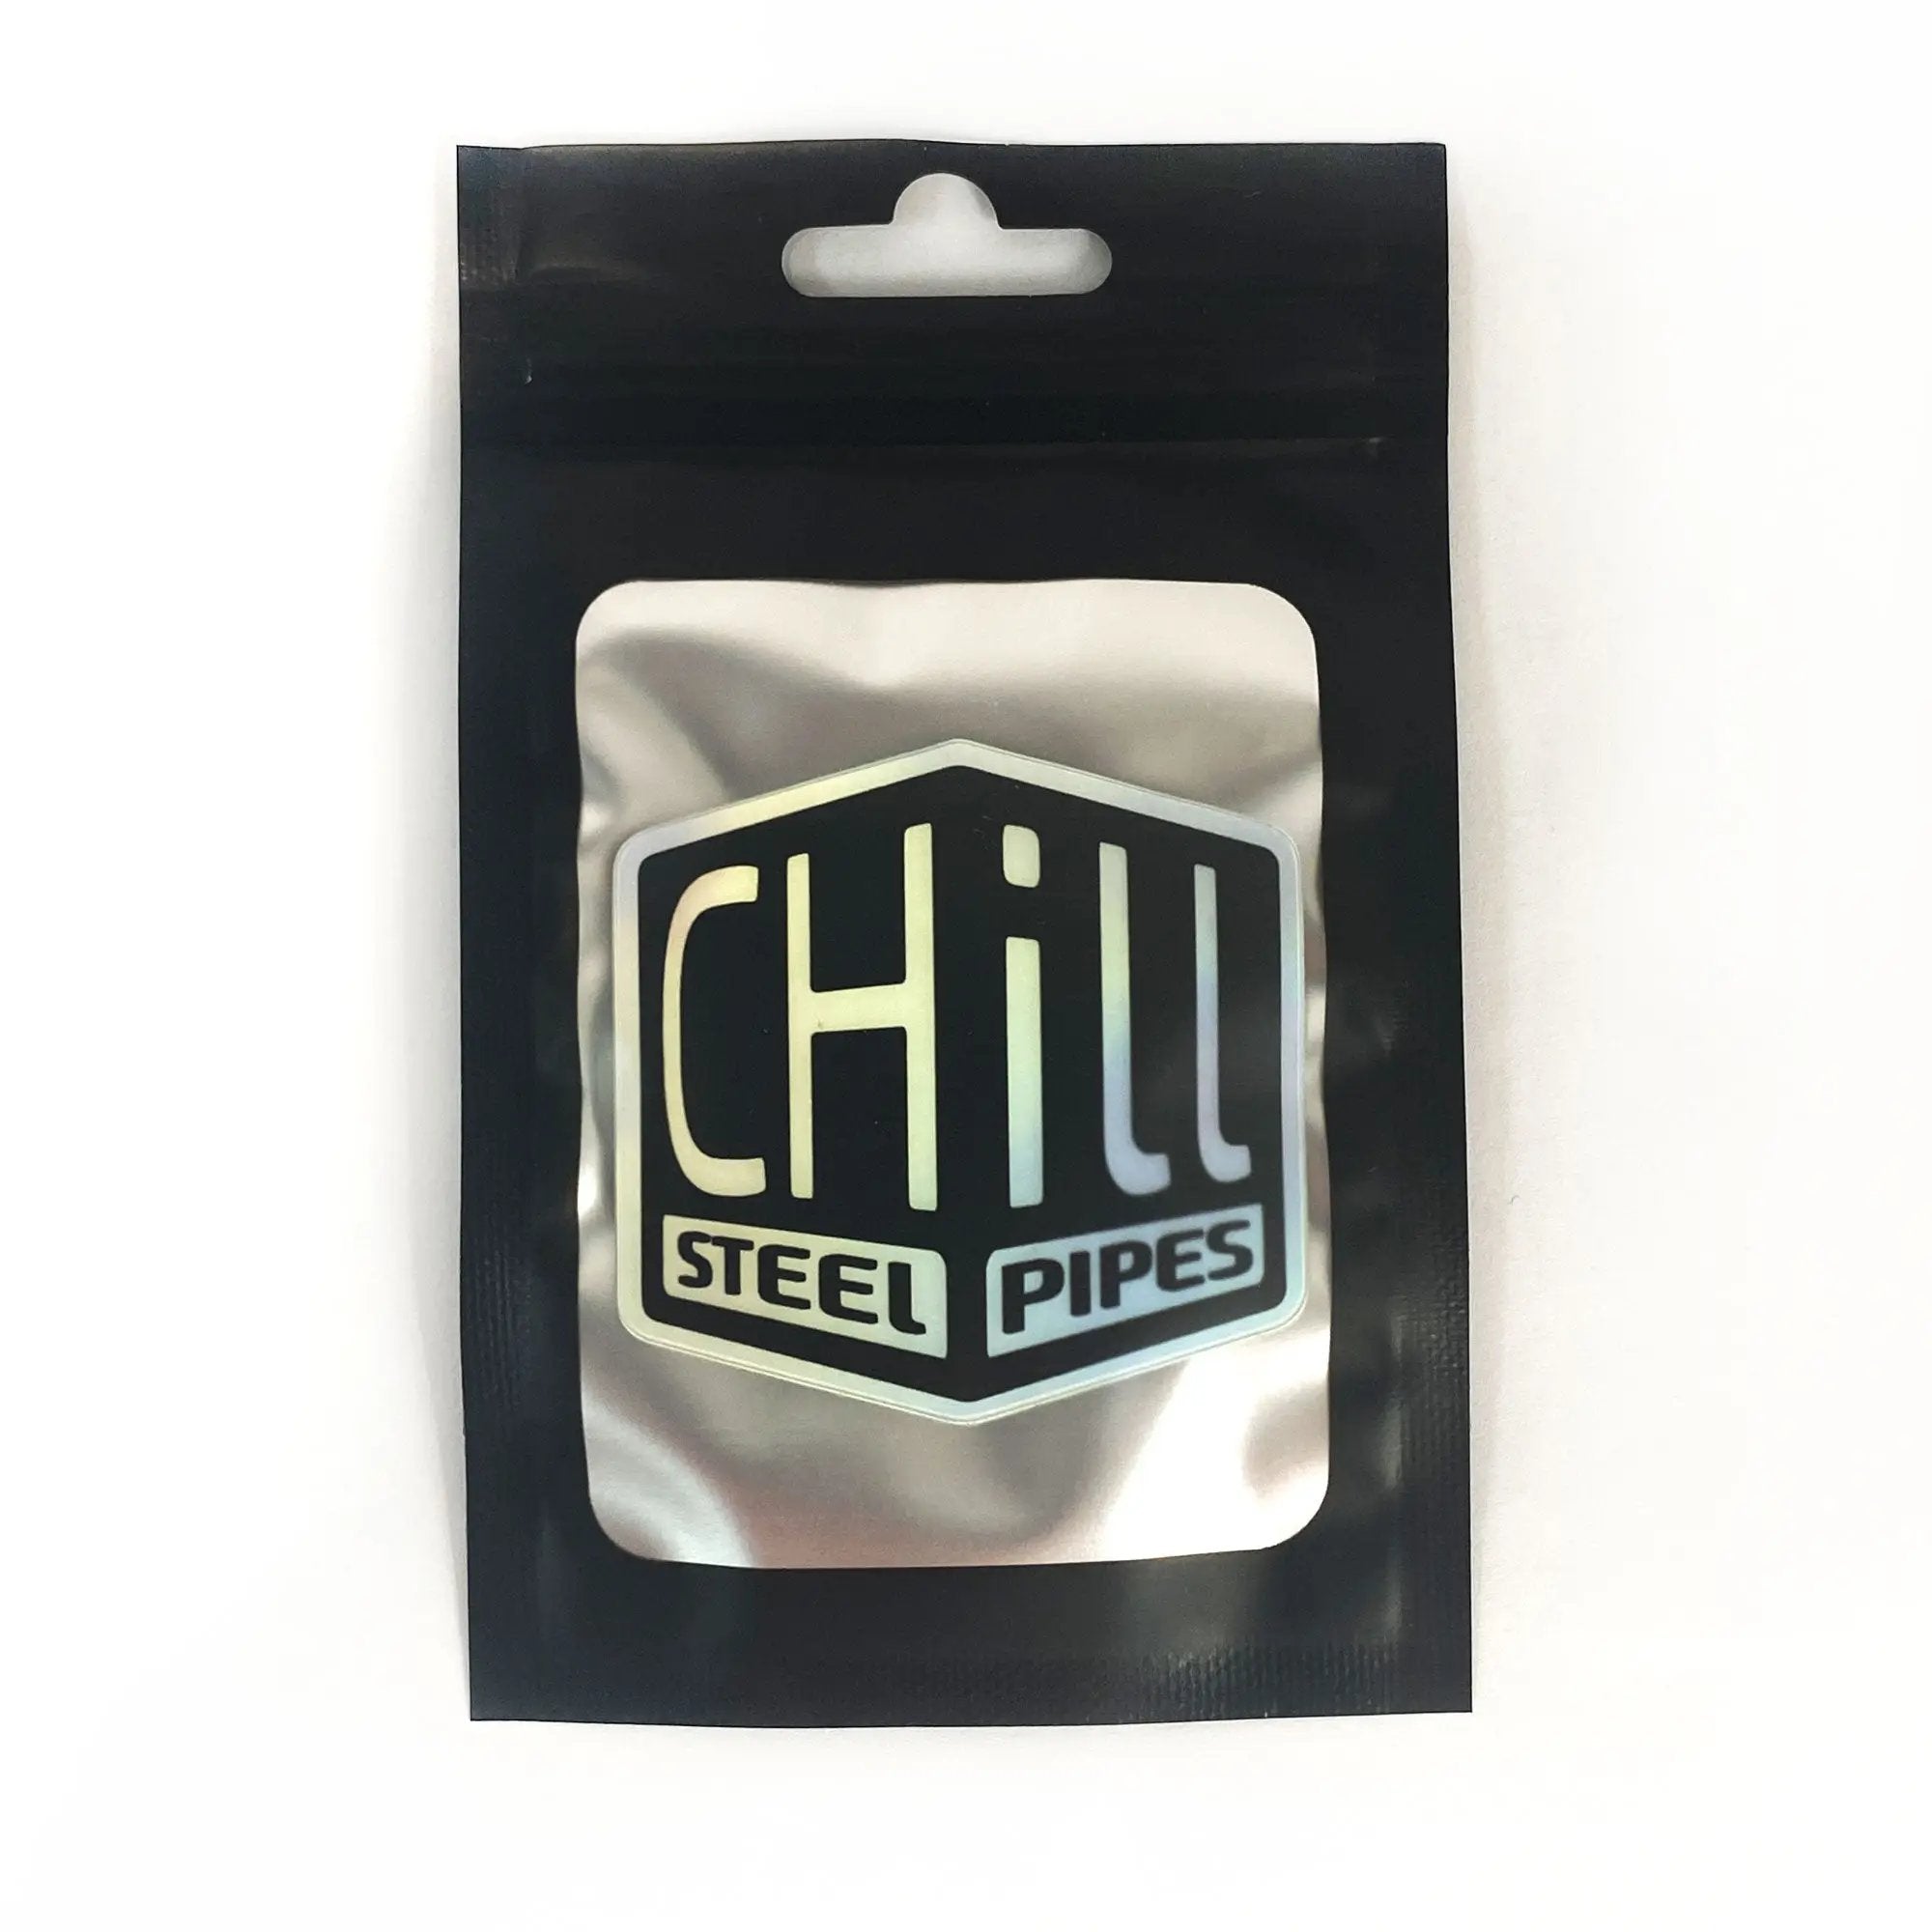 Chill - Neckpiece Gasket Replacement Kit by Chill Steel Pipes